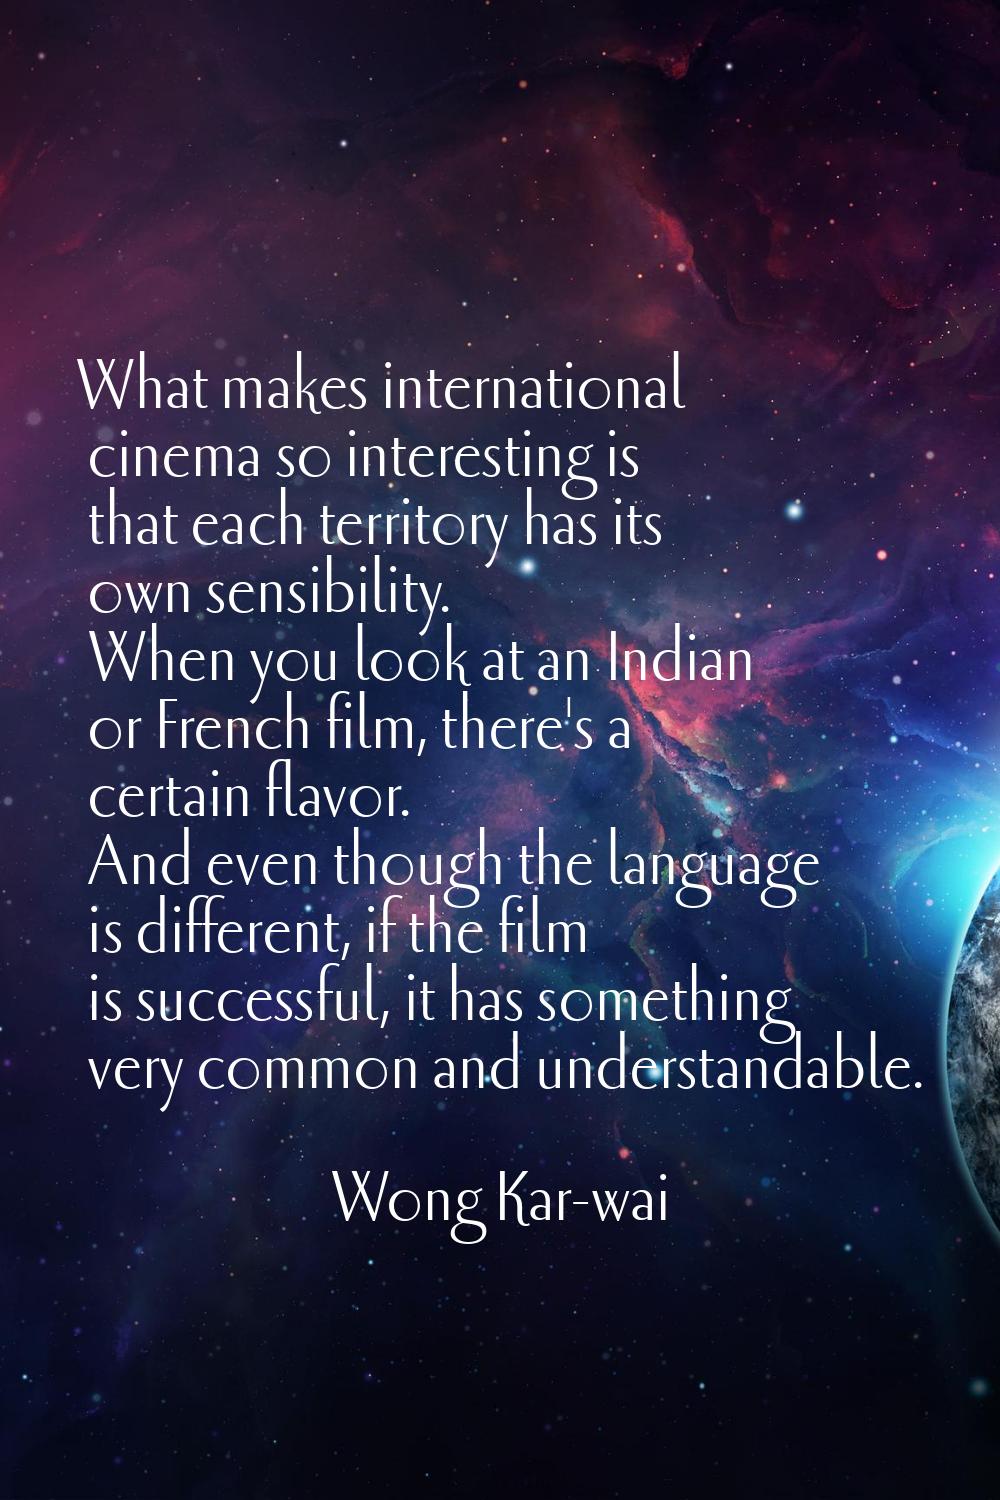 What makes international cinema so interesting is that each territory has its own sensibility. When